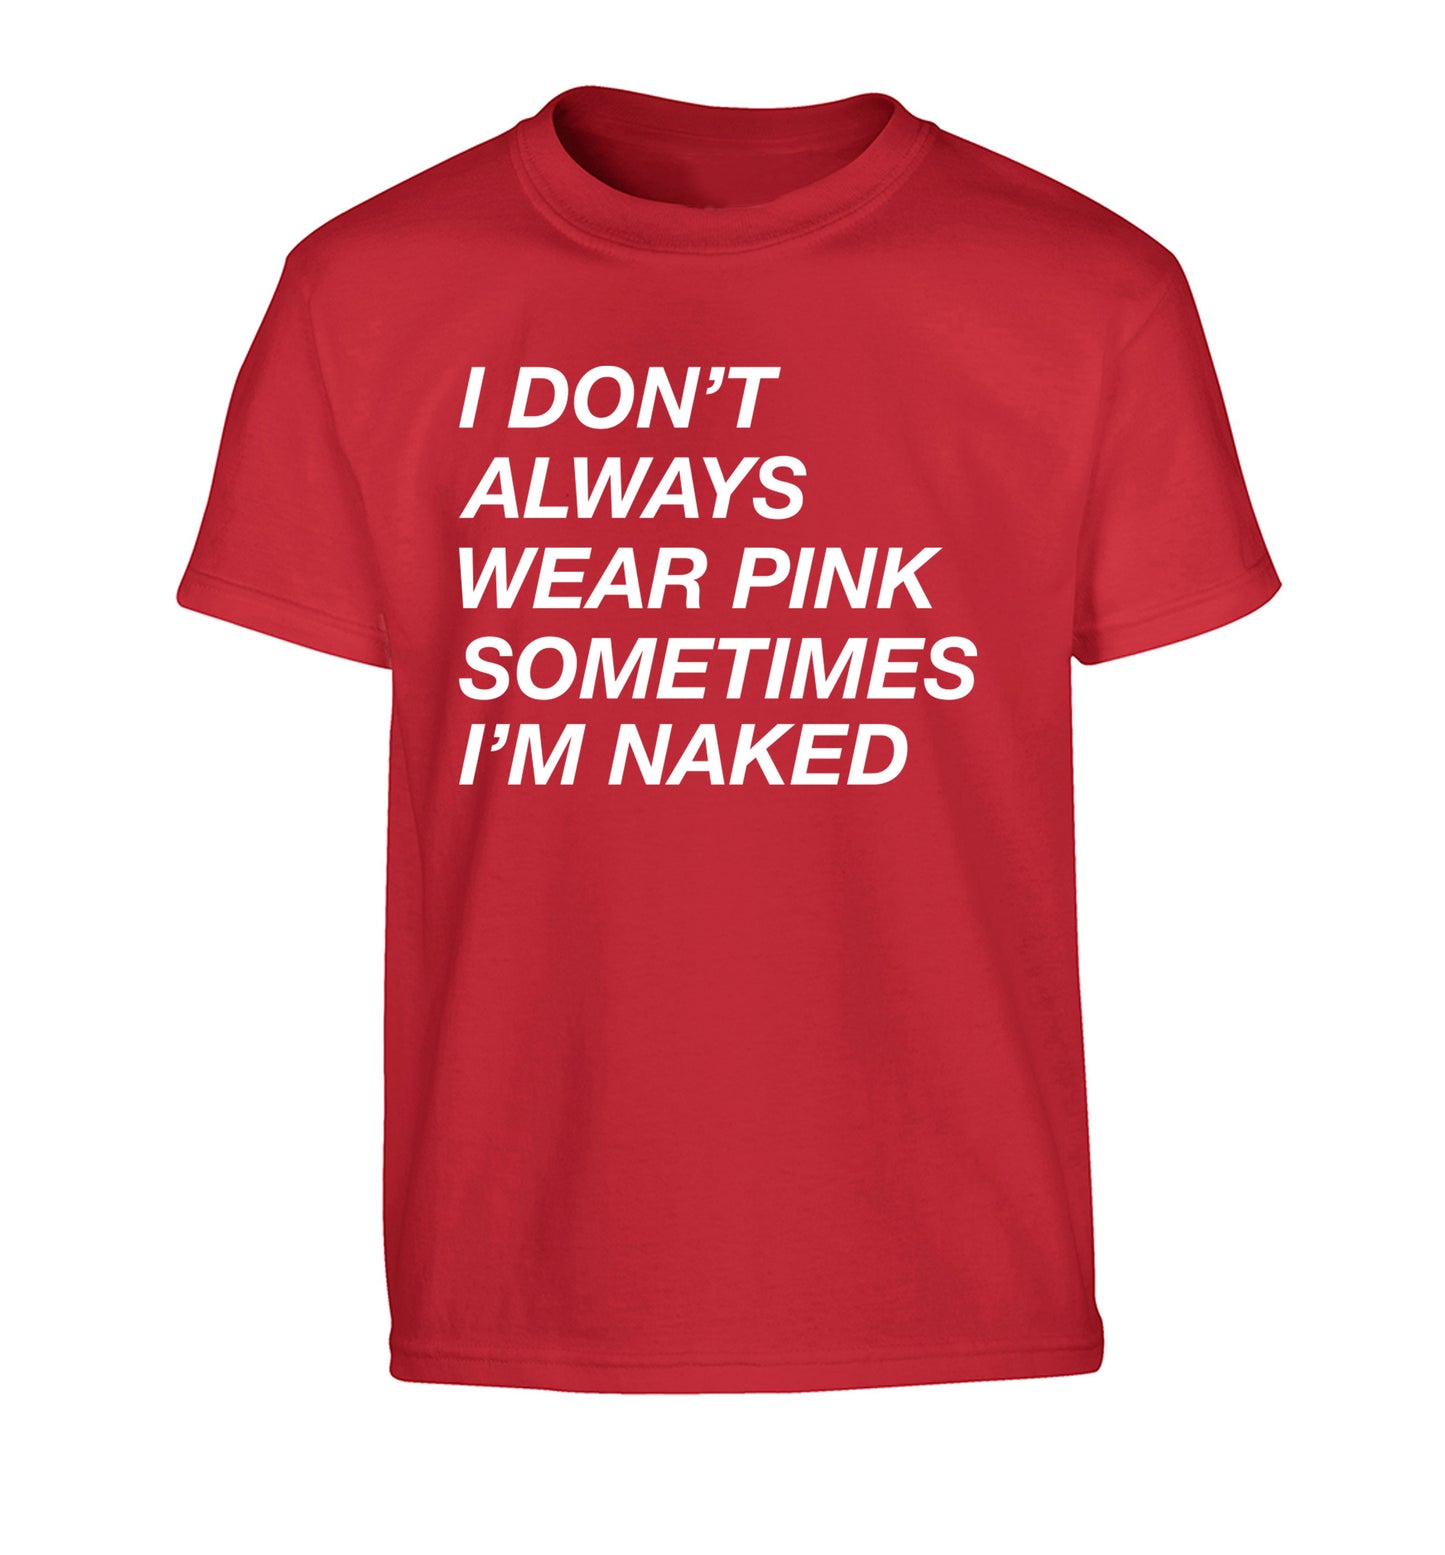 I don't always wear pink sometimes I'm naked Children's red Tshirt 12-13 Years